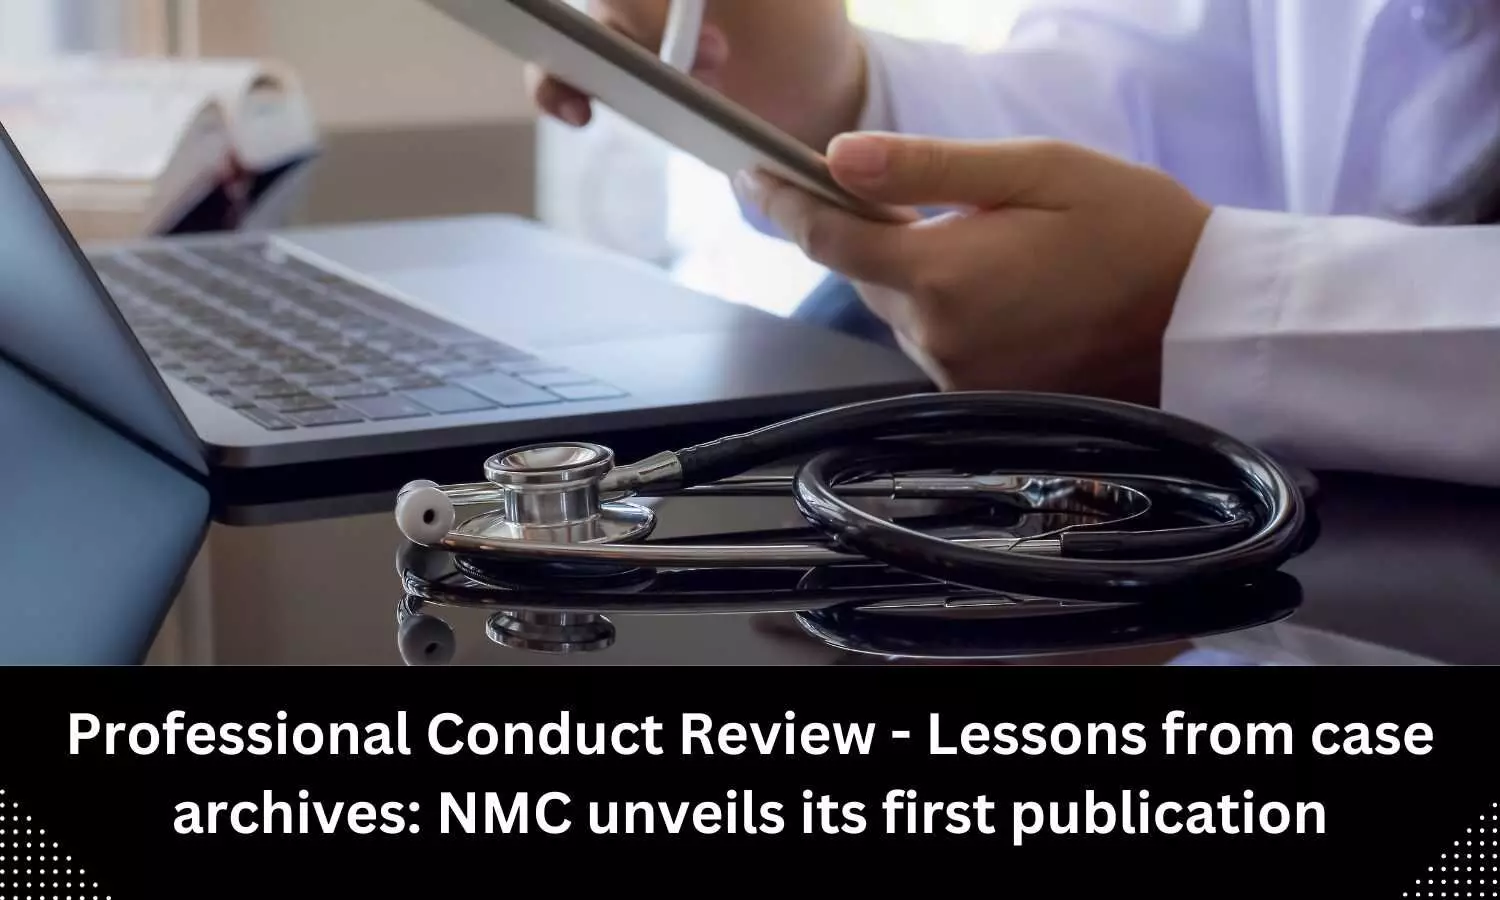 NMC unveils its first publication, an E-Book titled Professional Conduct Review - Lessons from case archives